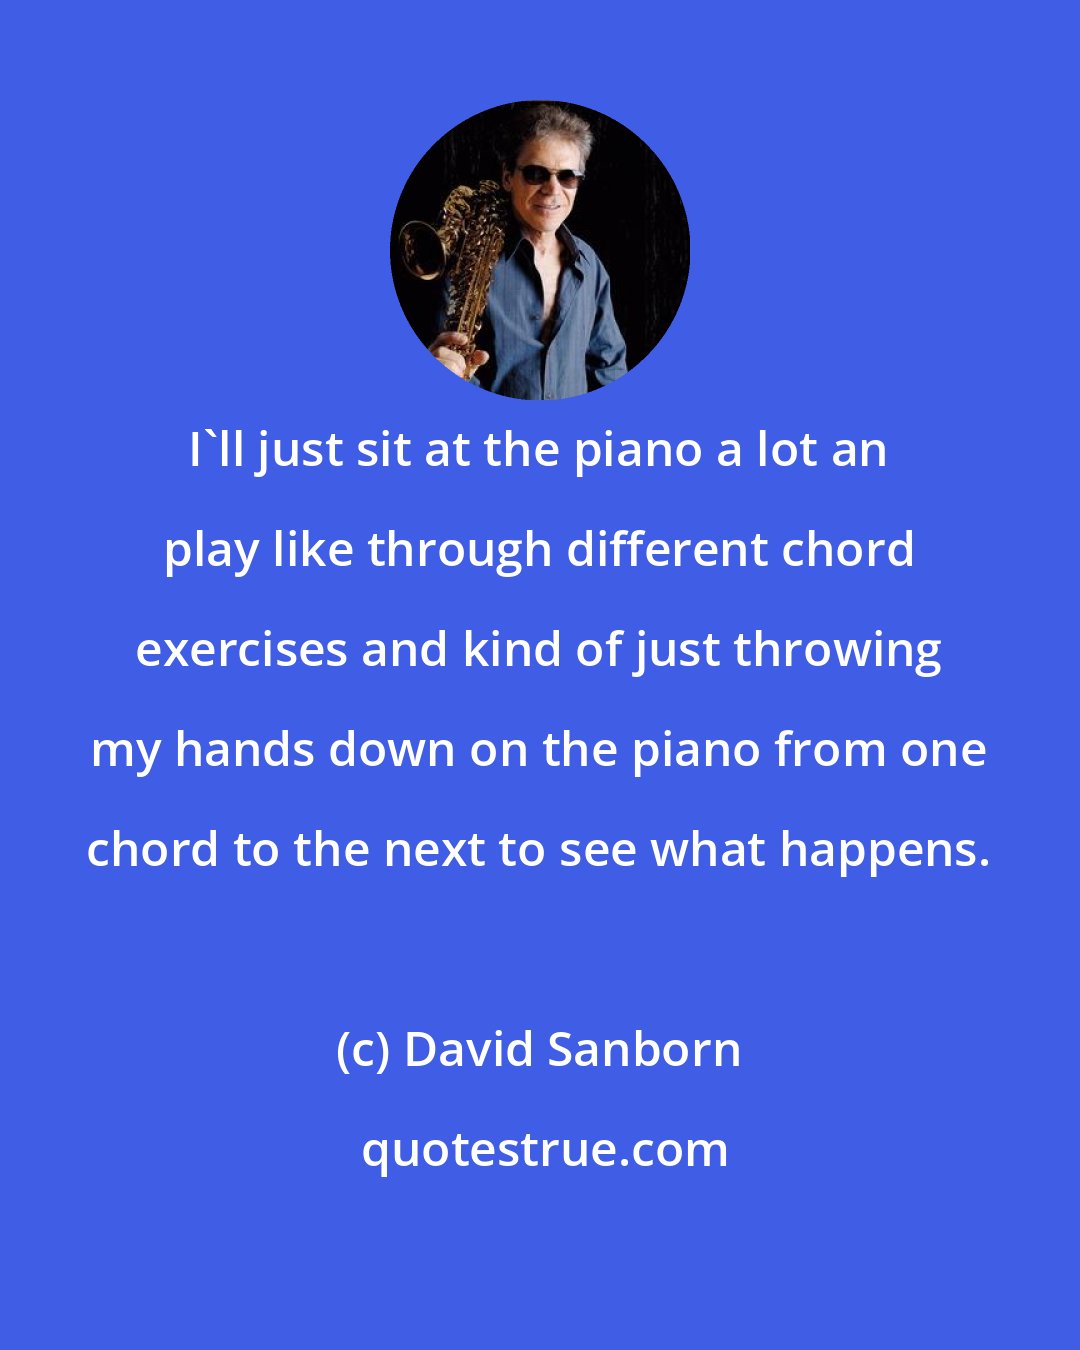 David Sanborn: I'll just sit at the piano a lot an play like through different chord exercises and kind of just throwing my hands down on the piano from one chord to the next to see what happens.